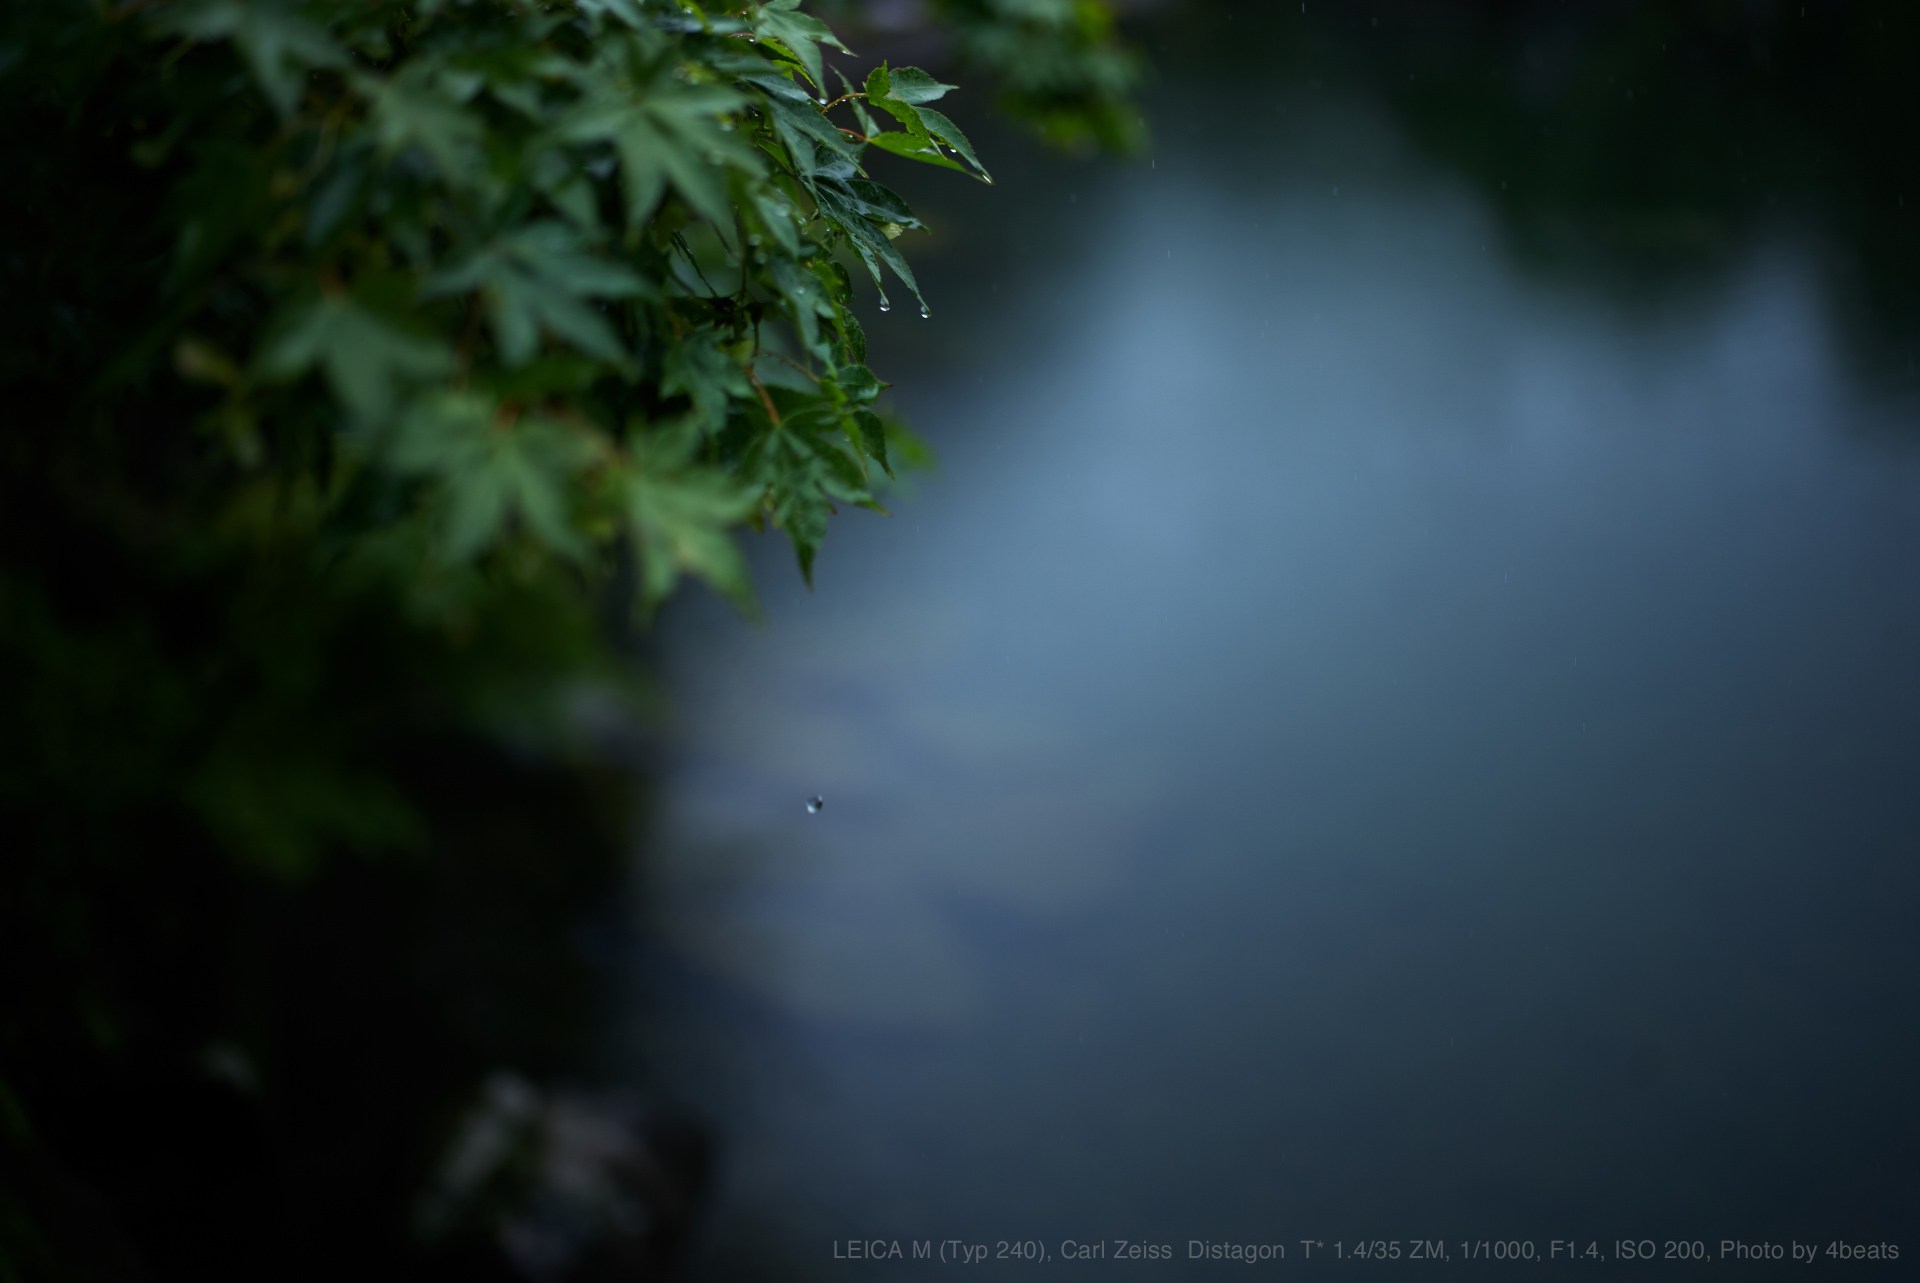 LEICA M (Typ 240), Carl Zeiss  Distagon  T* 1.4/35 ZM, 1/1000, F1.4, ISO 200, Photo by 4beats